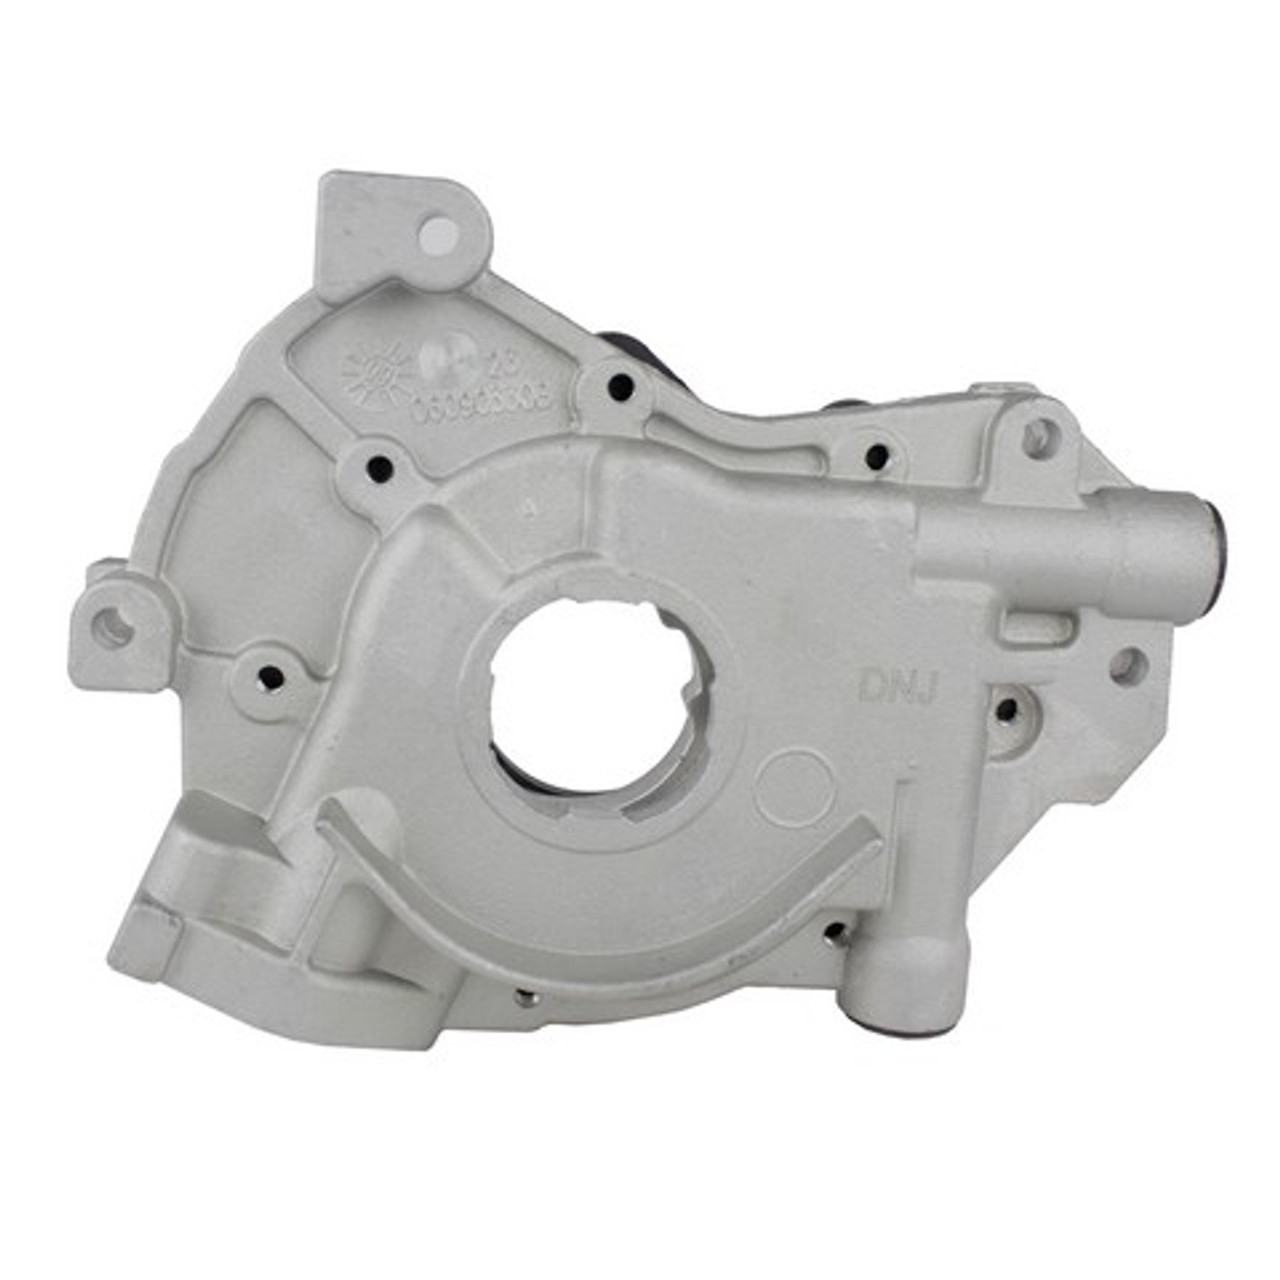 Oil Pump 5.4L 2001 Ford Expedition - OP4131.191